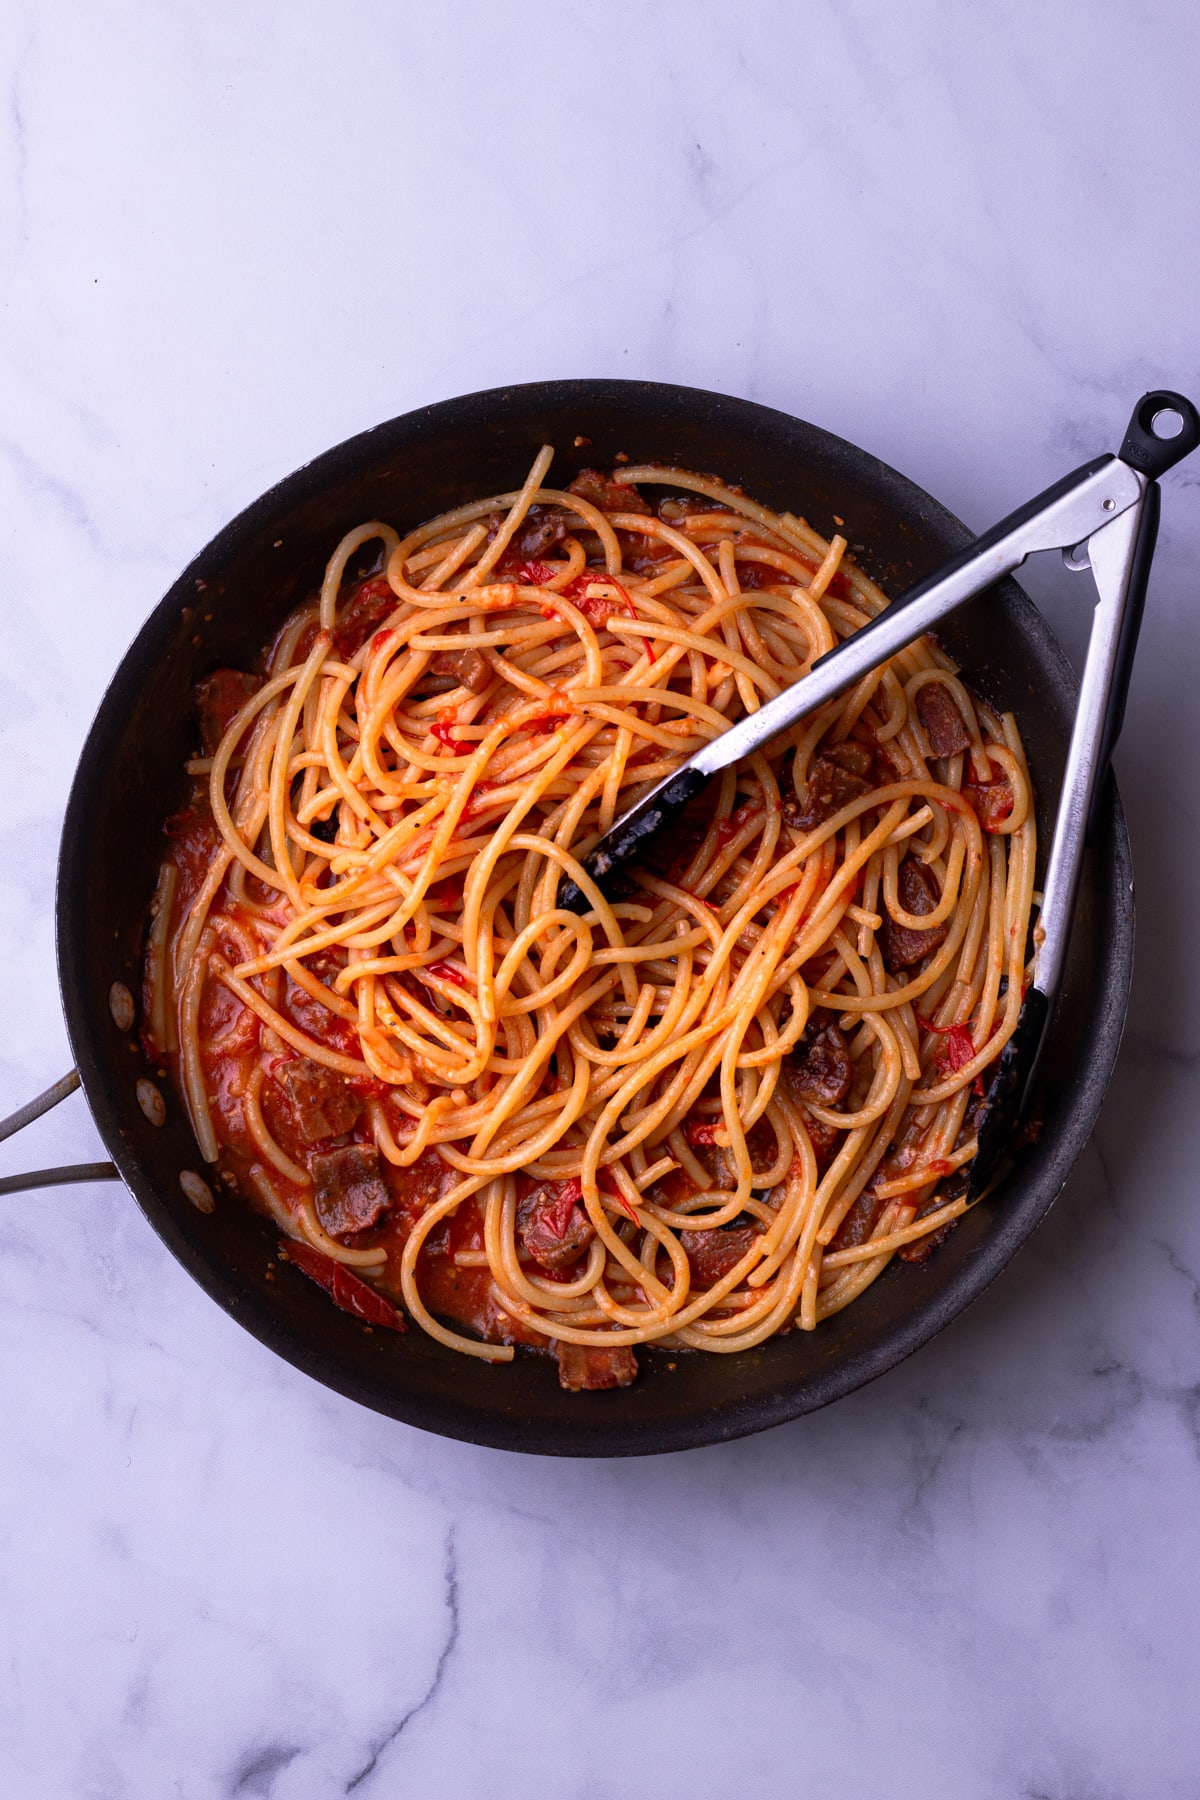 Overhead view of a pan with pasta and tomato-guanciale sauce with tongs on a marble surface.